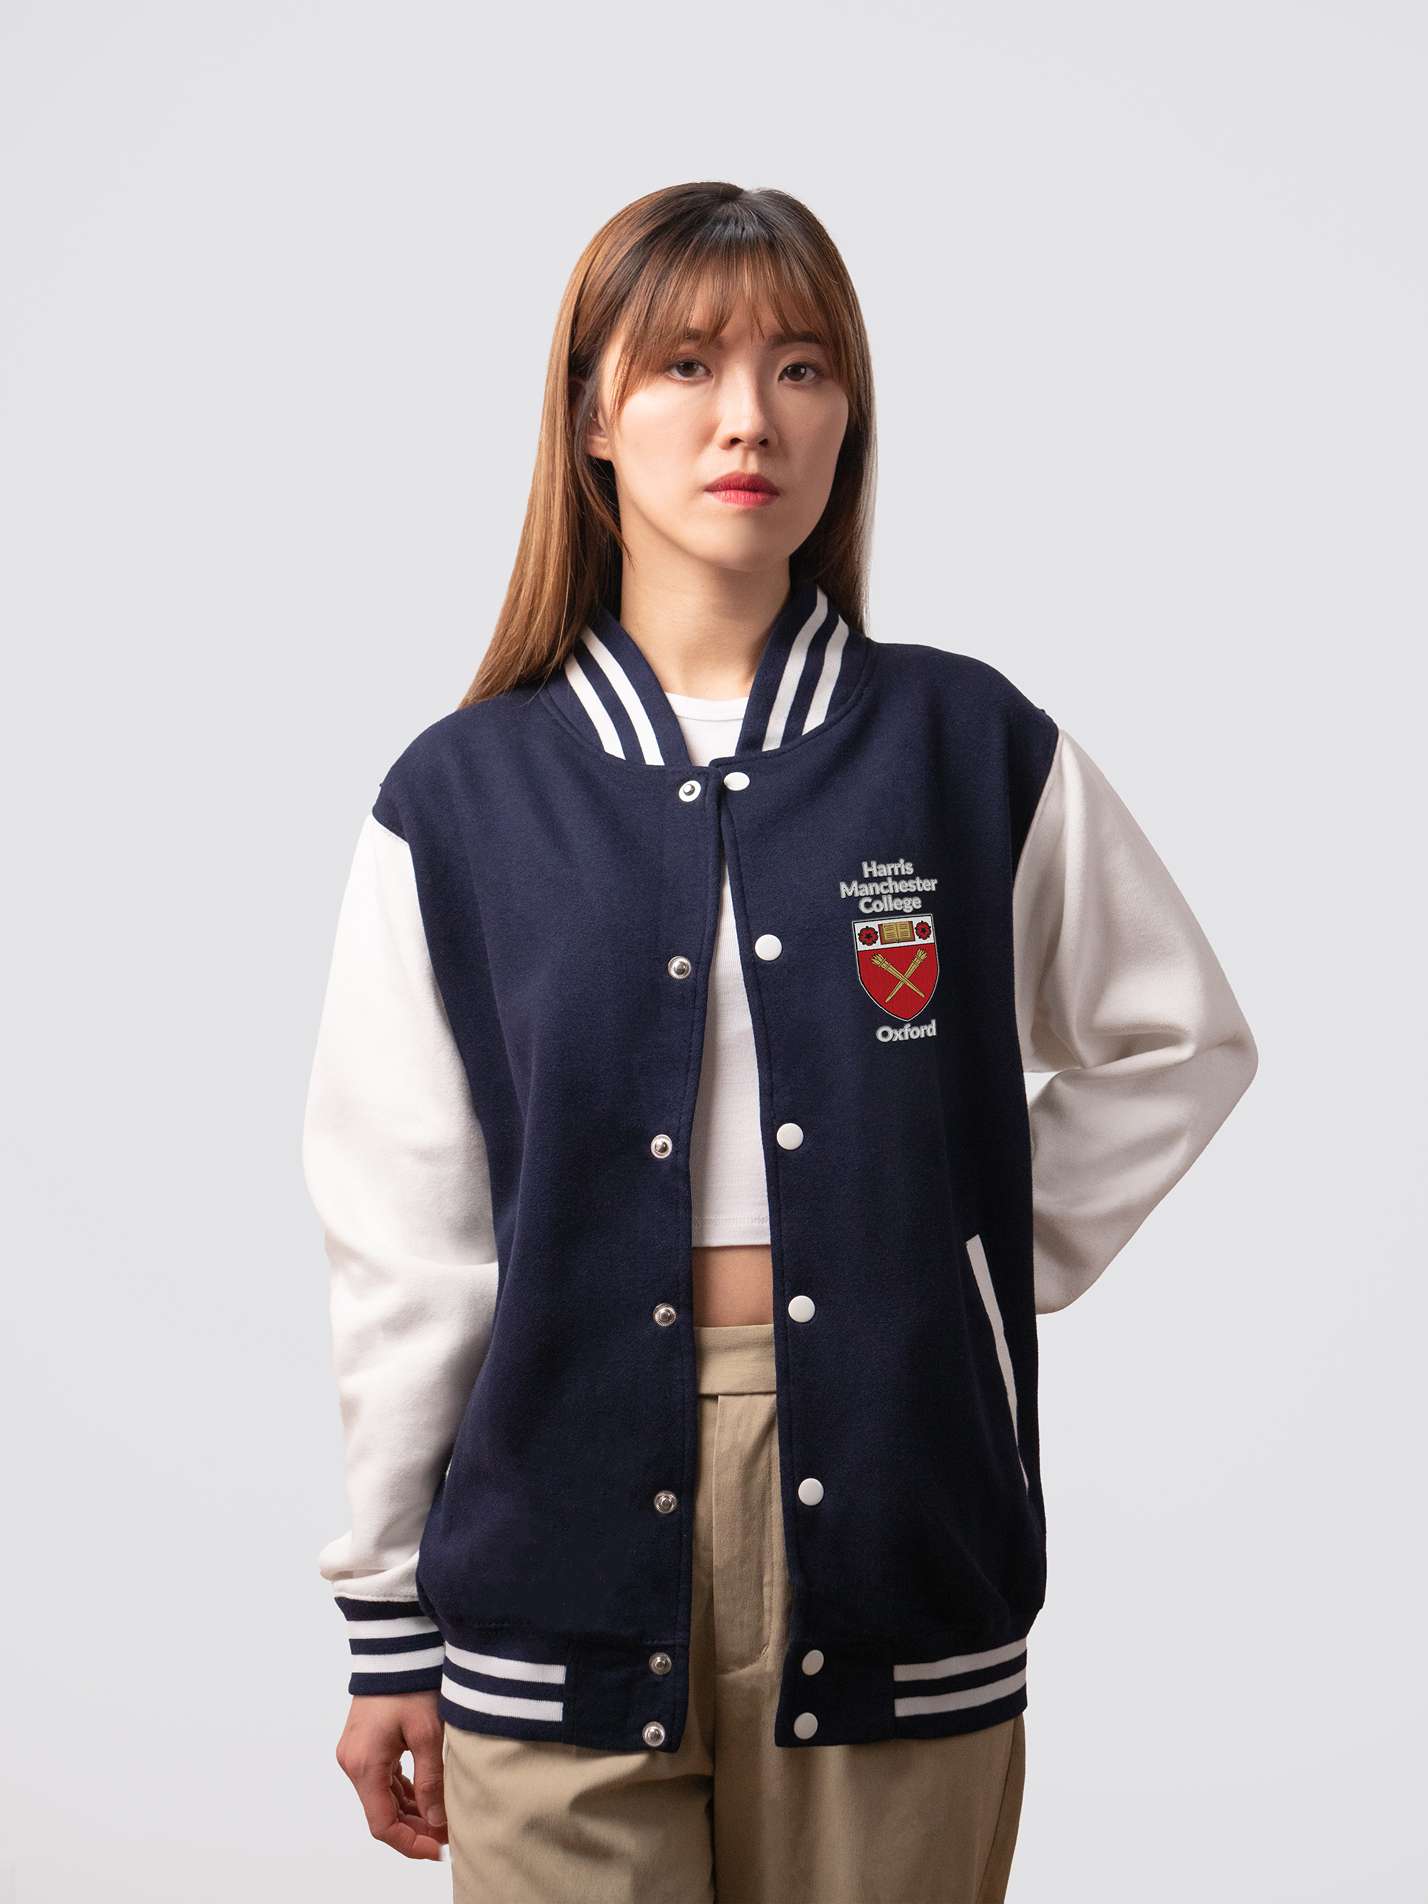 Retro style varsity jacket, with embroidered Harris Manchester crest